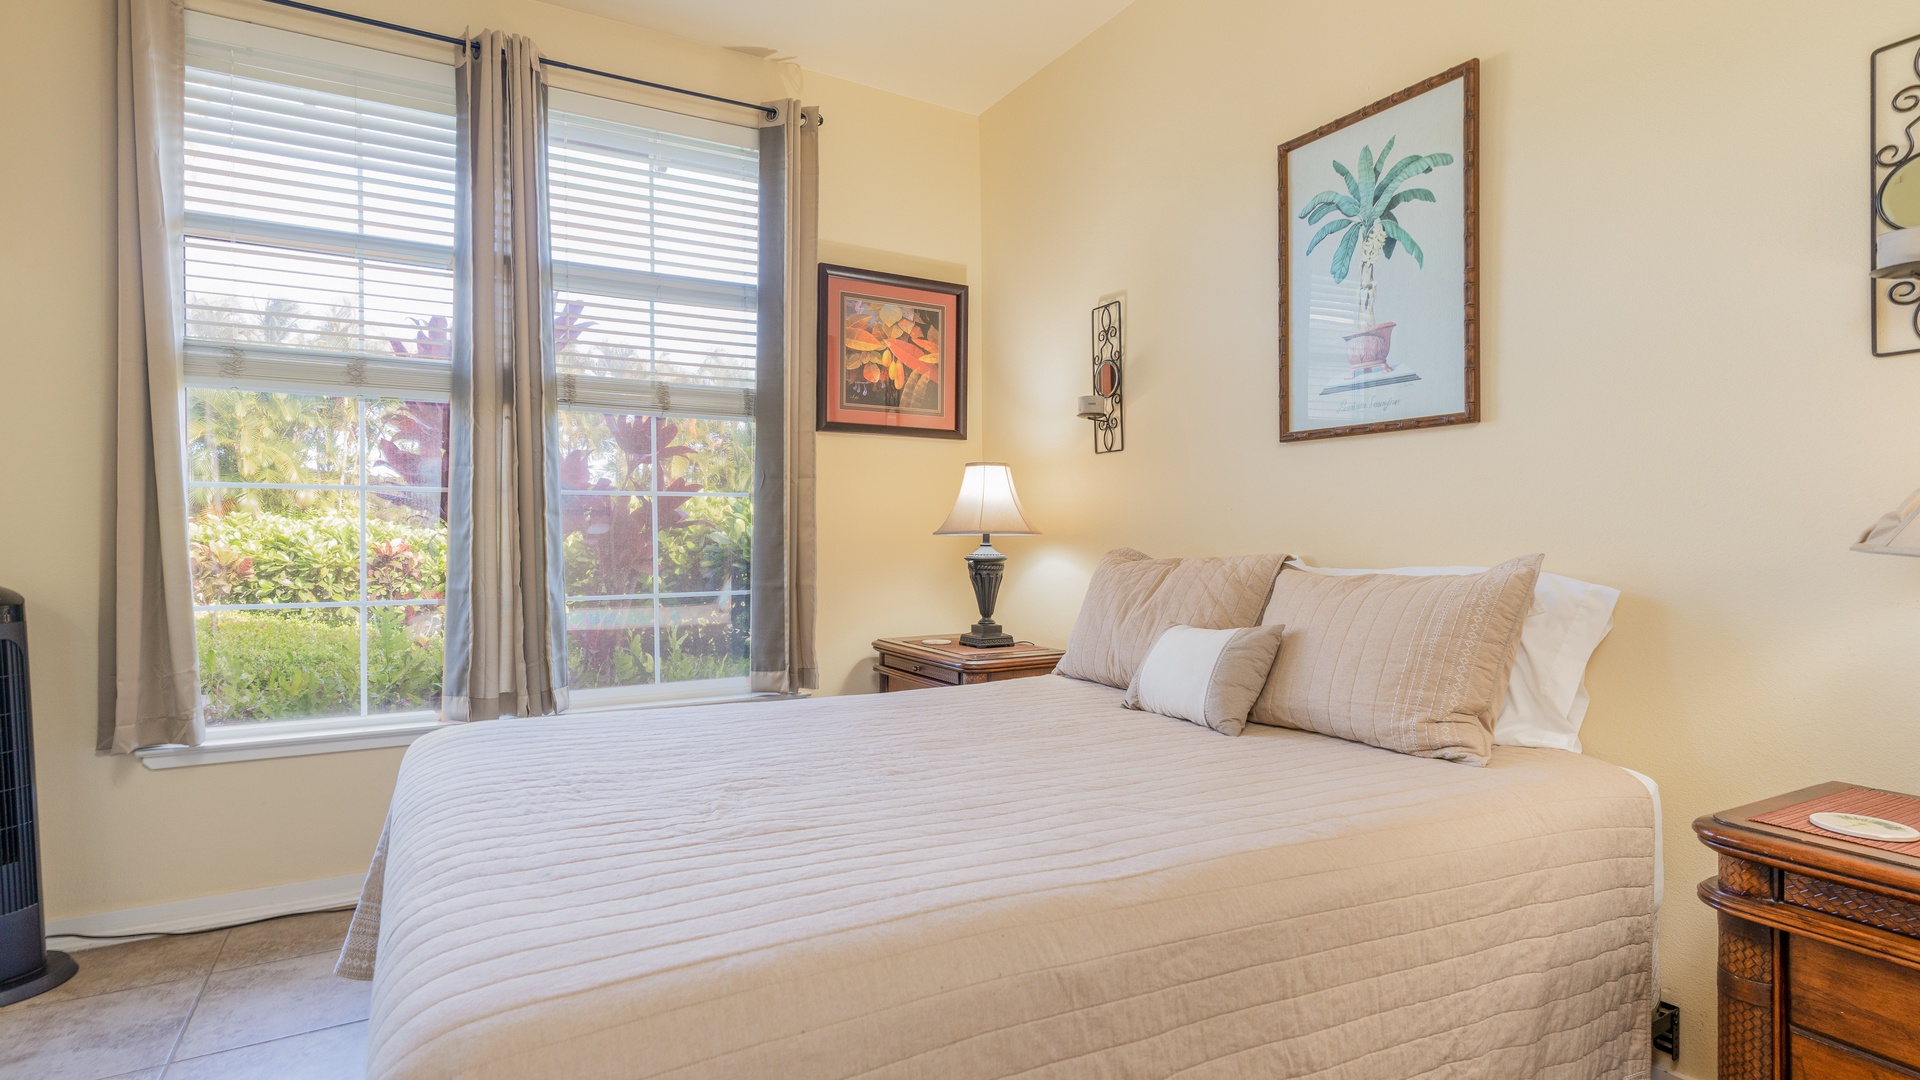 Kapolei Vacation Rentals, Kai Lani 8B - The second guest bedroom with sunshine views and framed art.